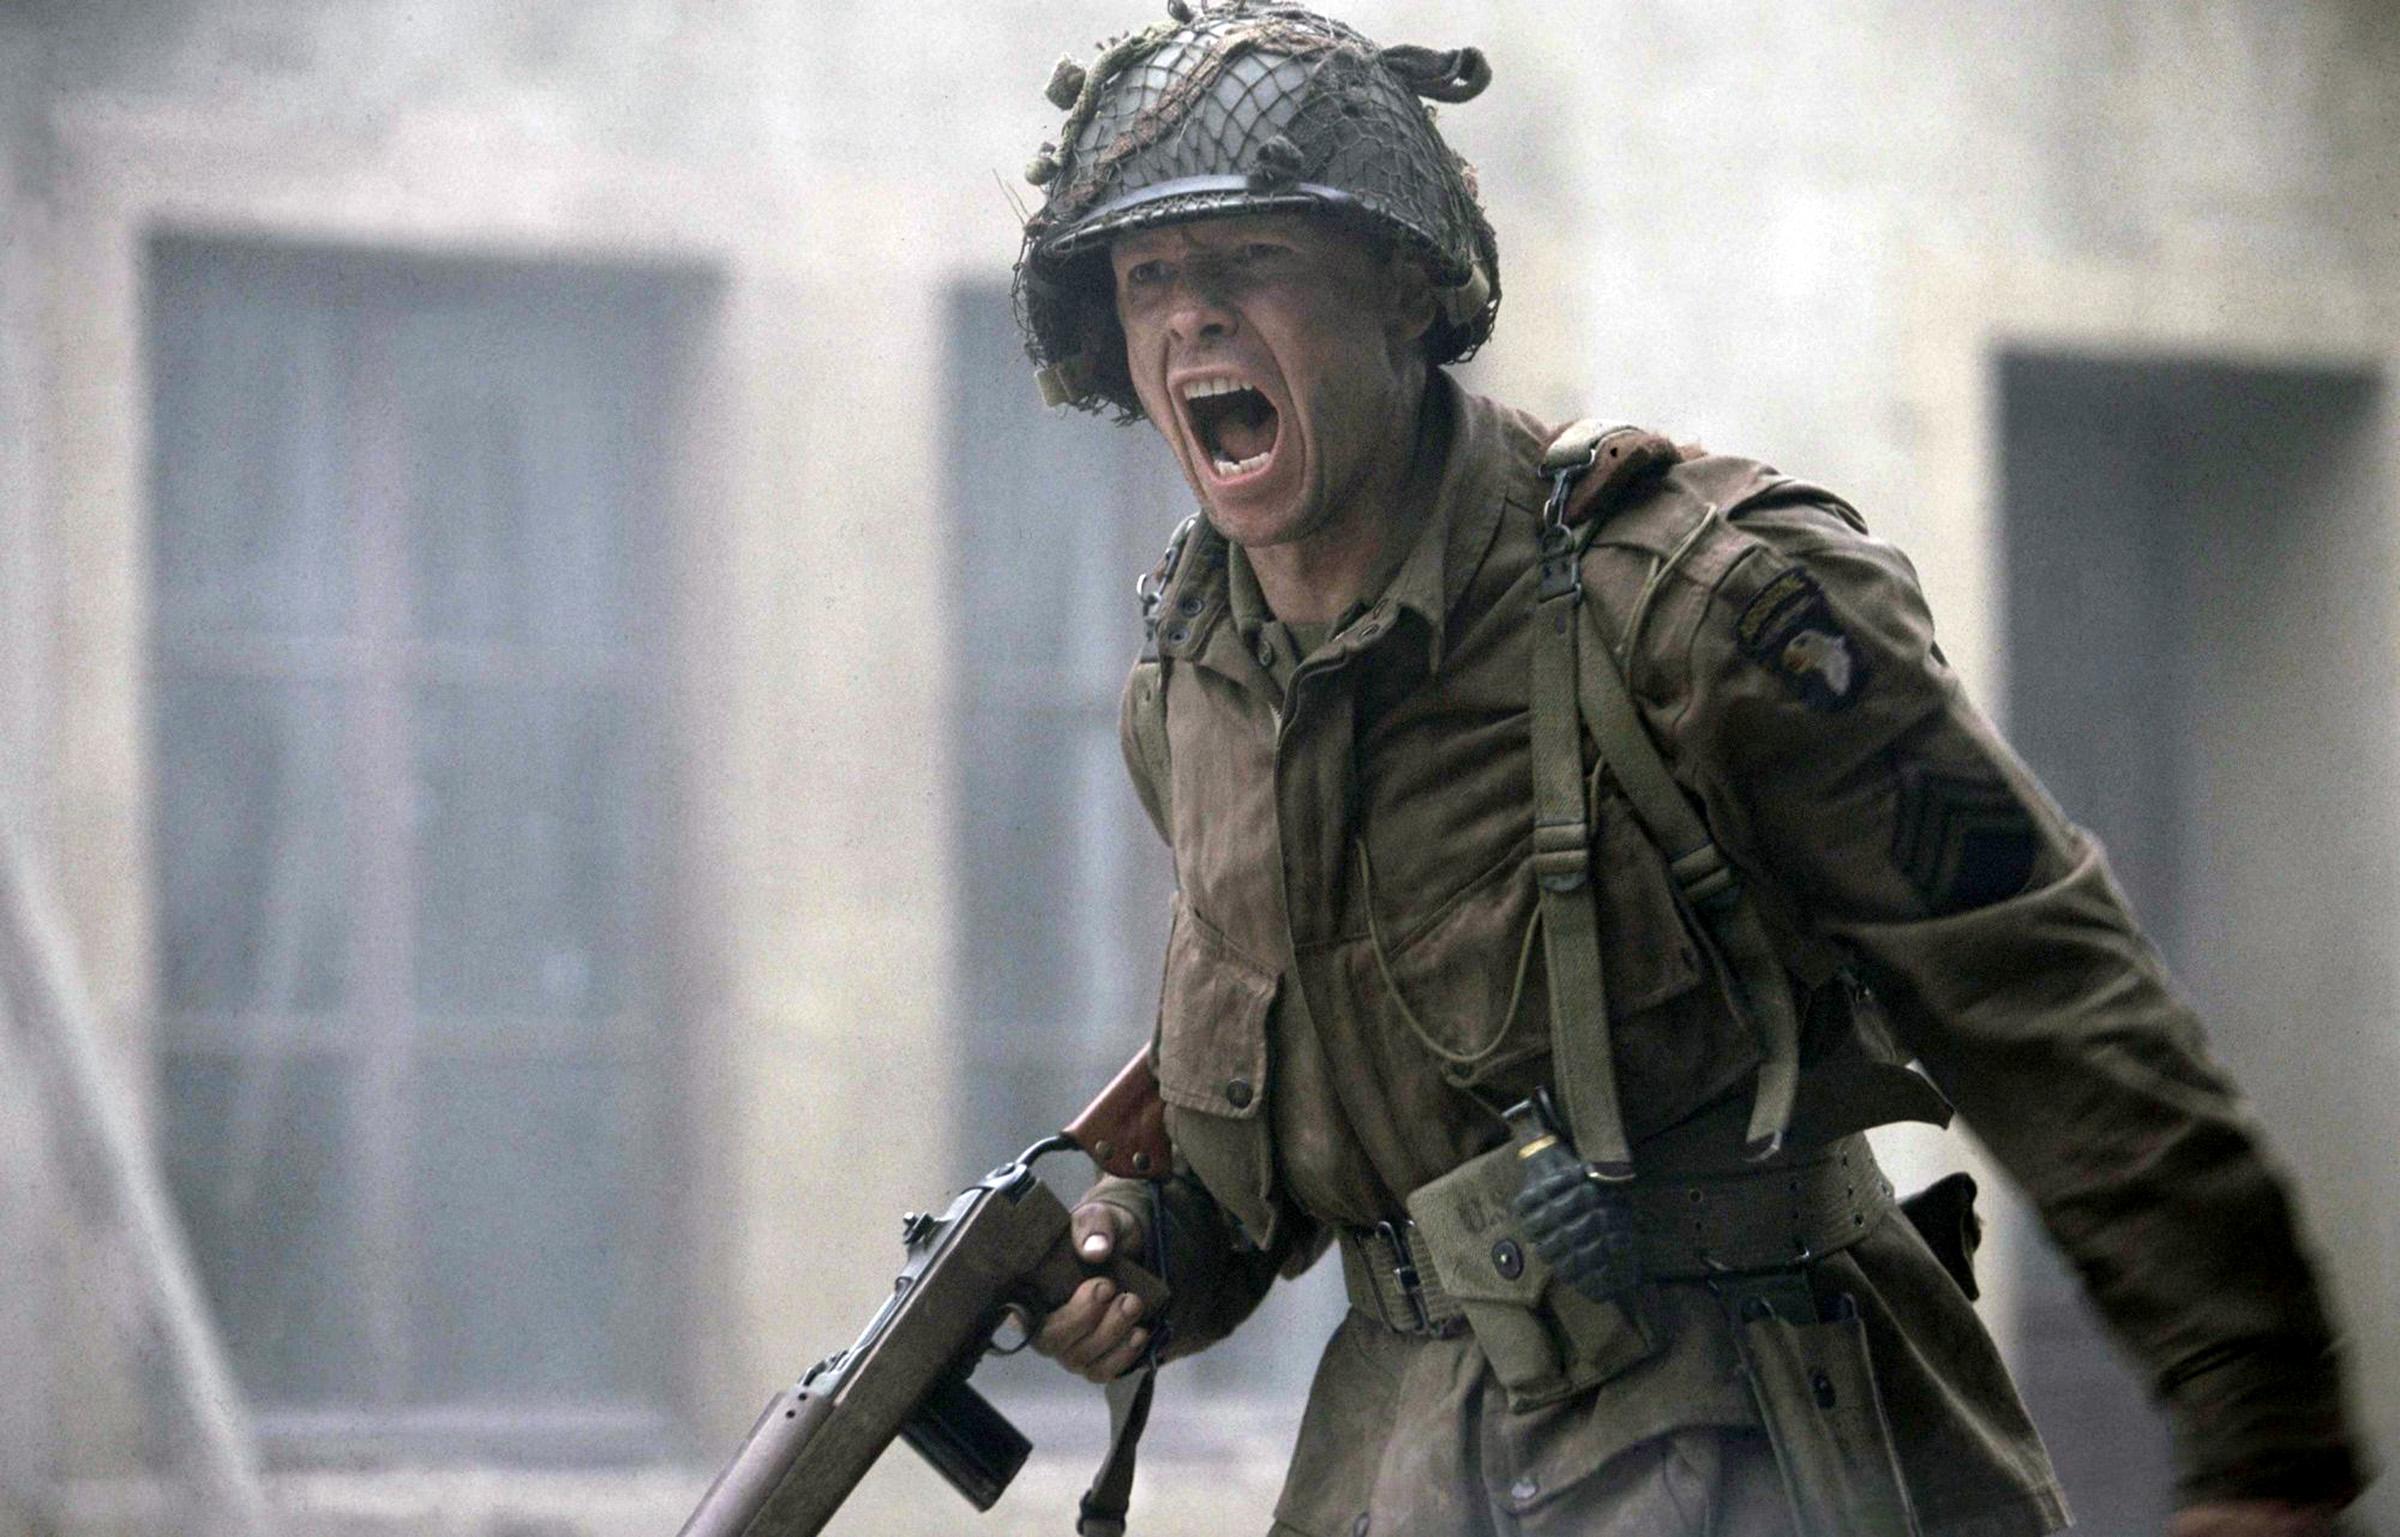 Donne Wahlberg as Carwood Lipton in the Band of Brothers cast